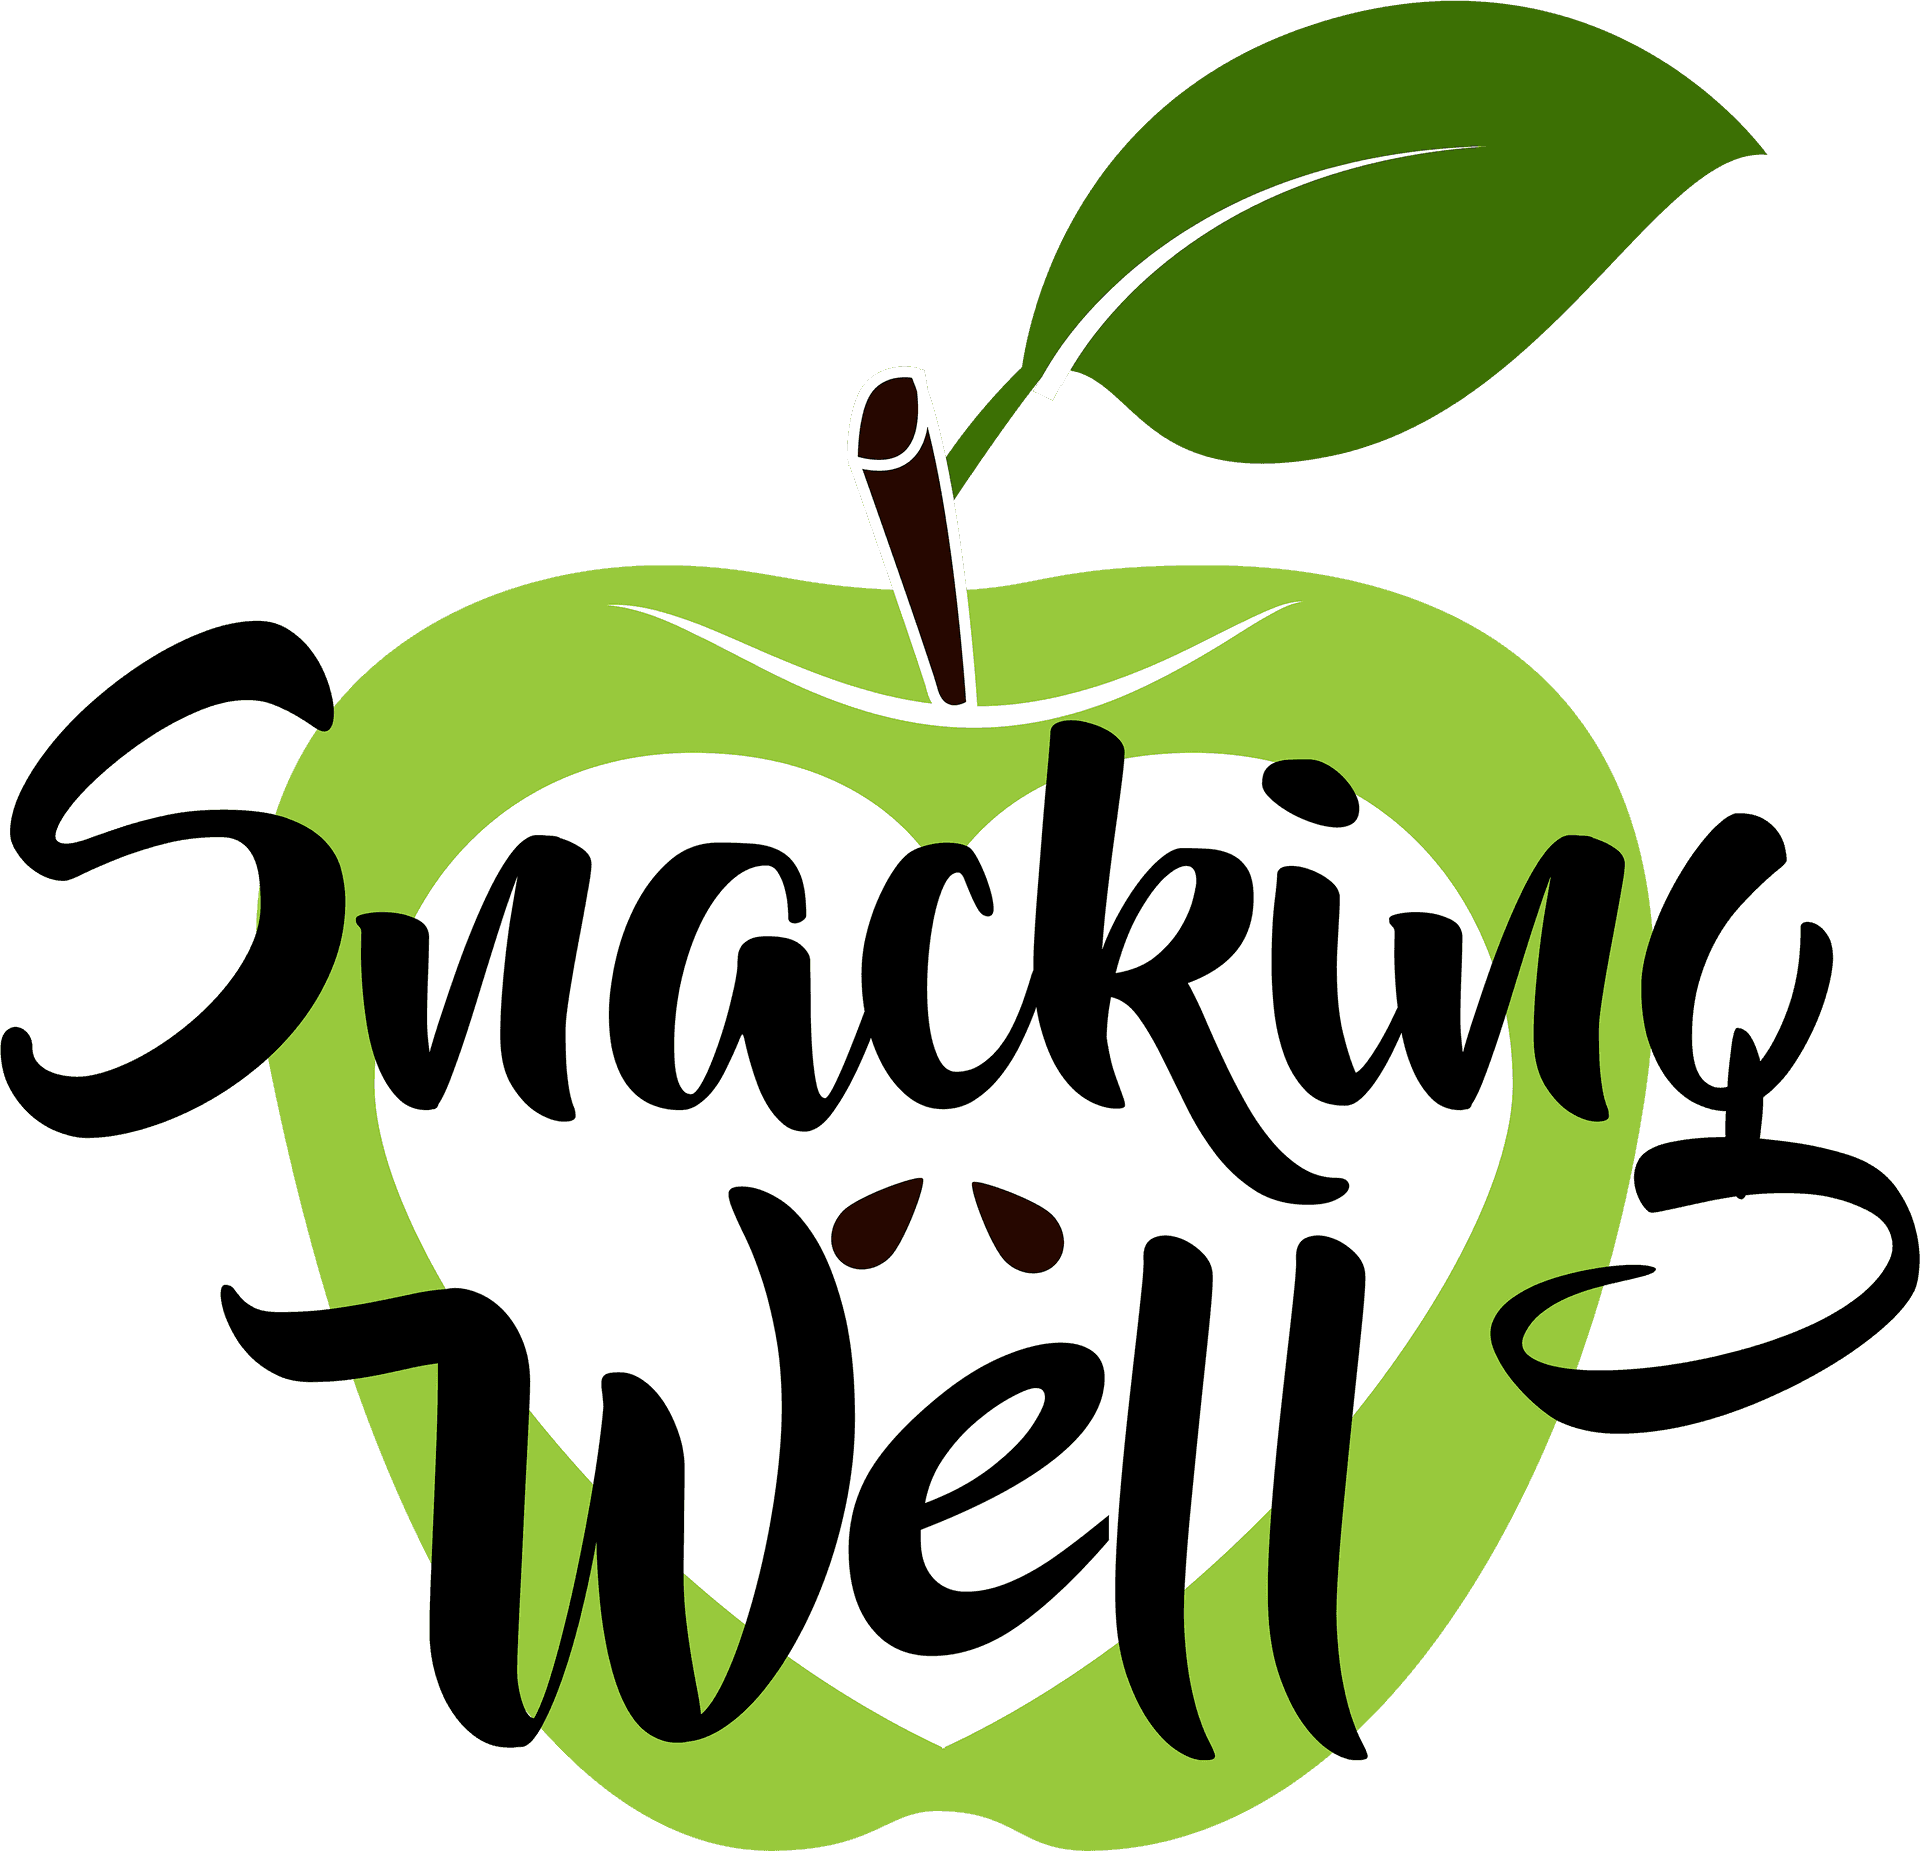 Snacking Well Logo PNG